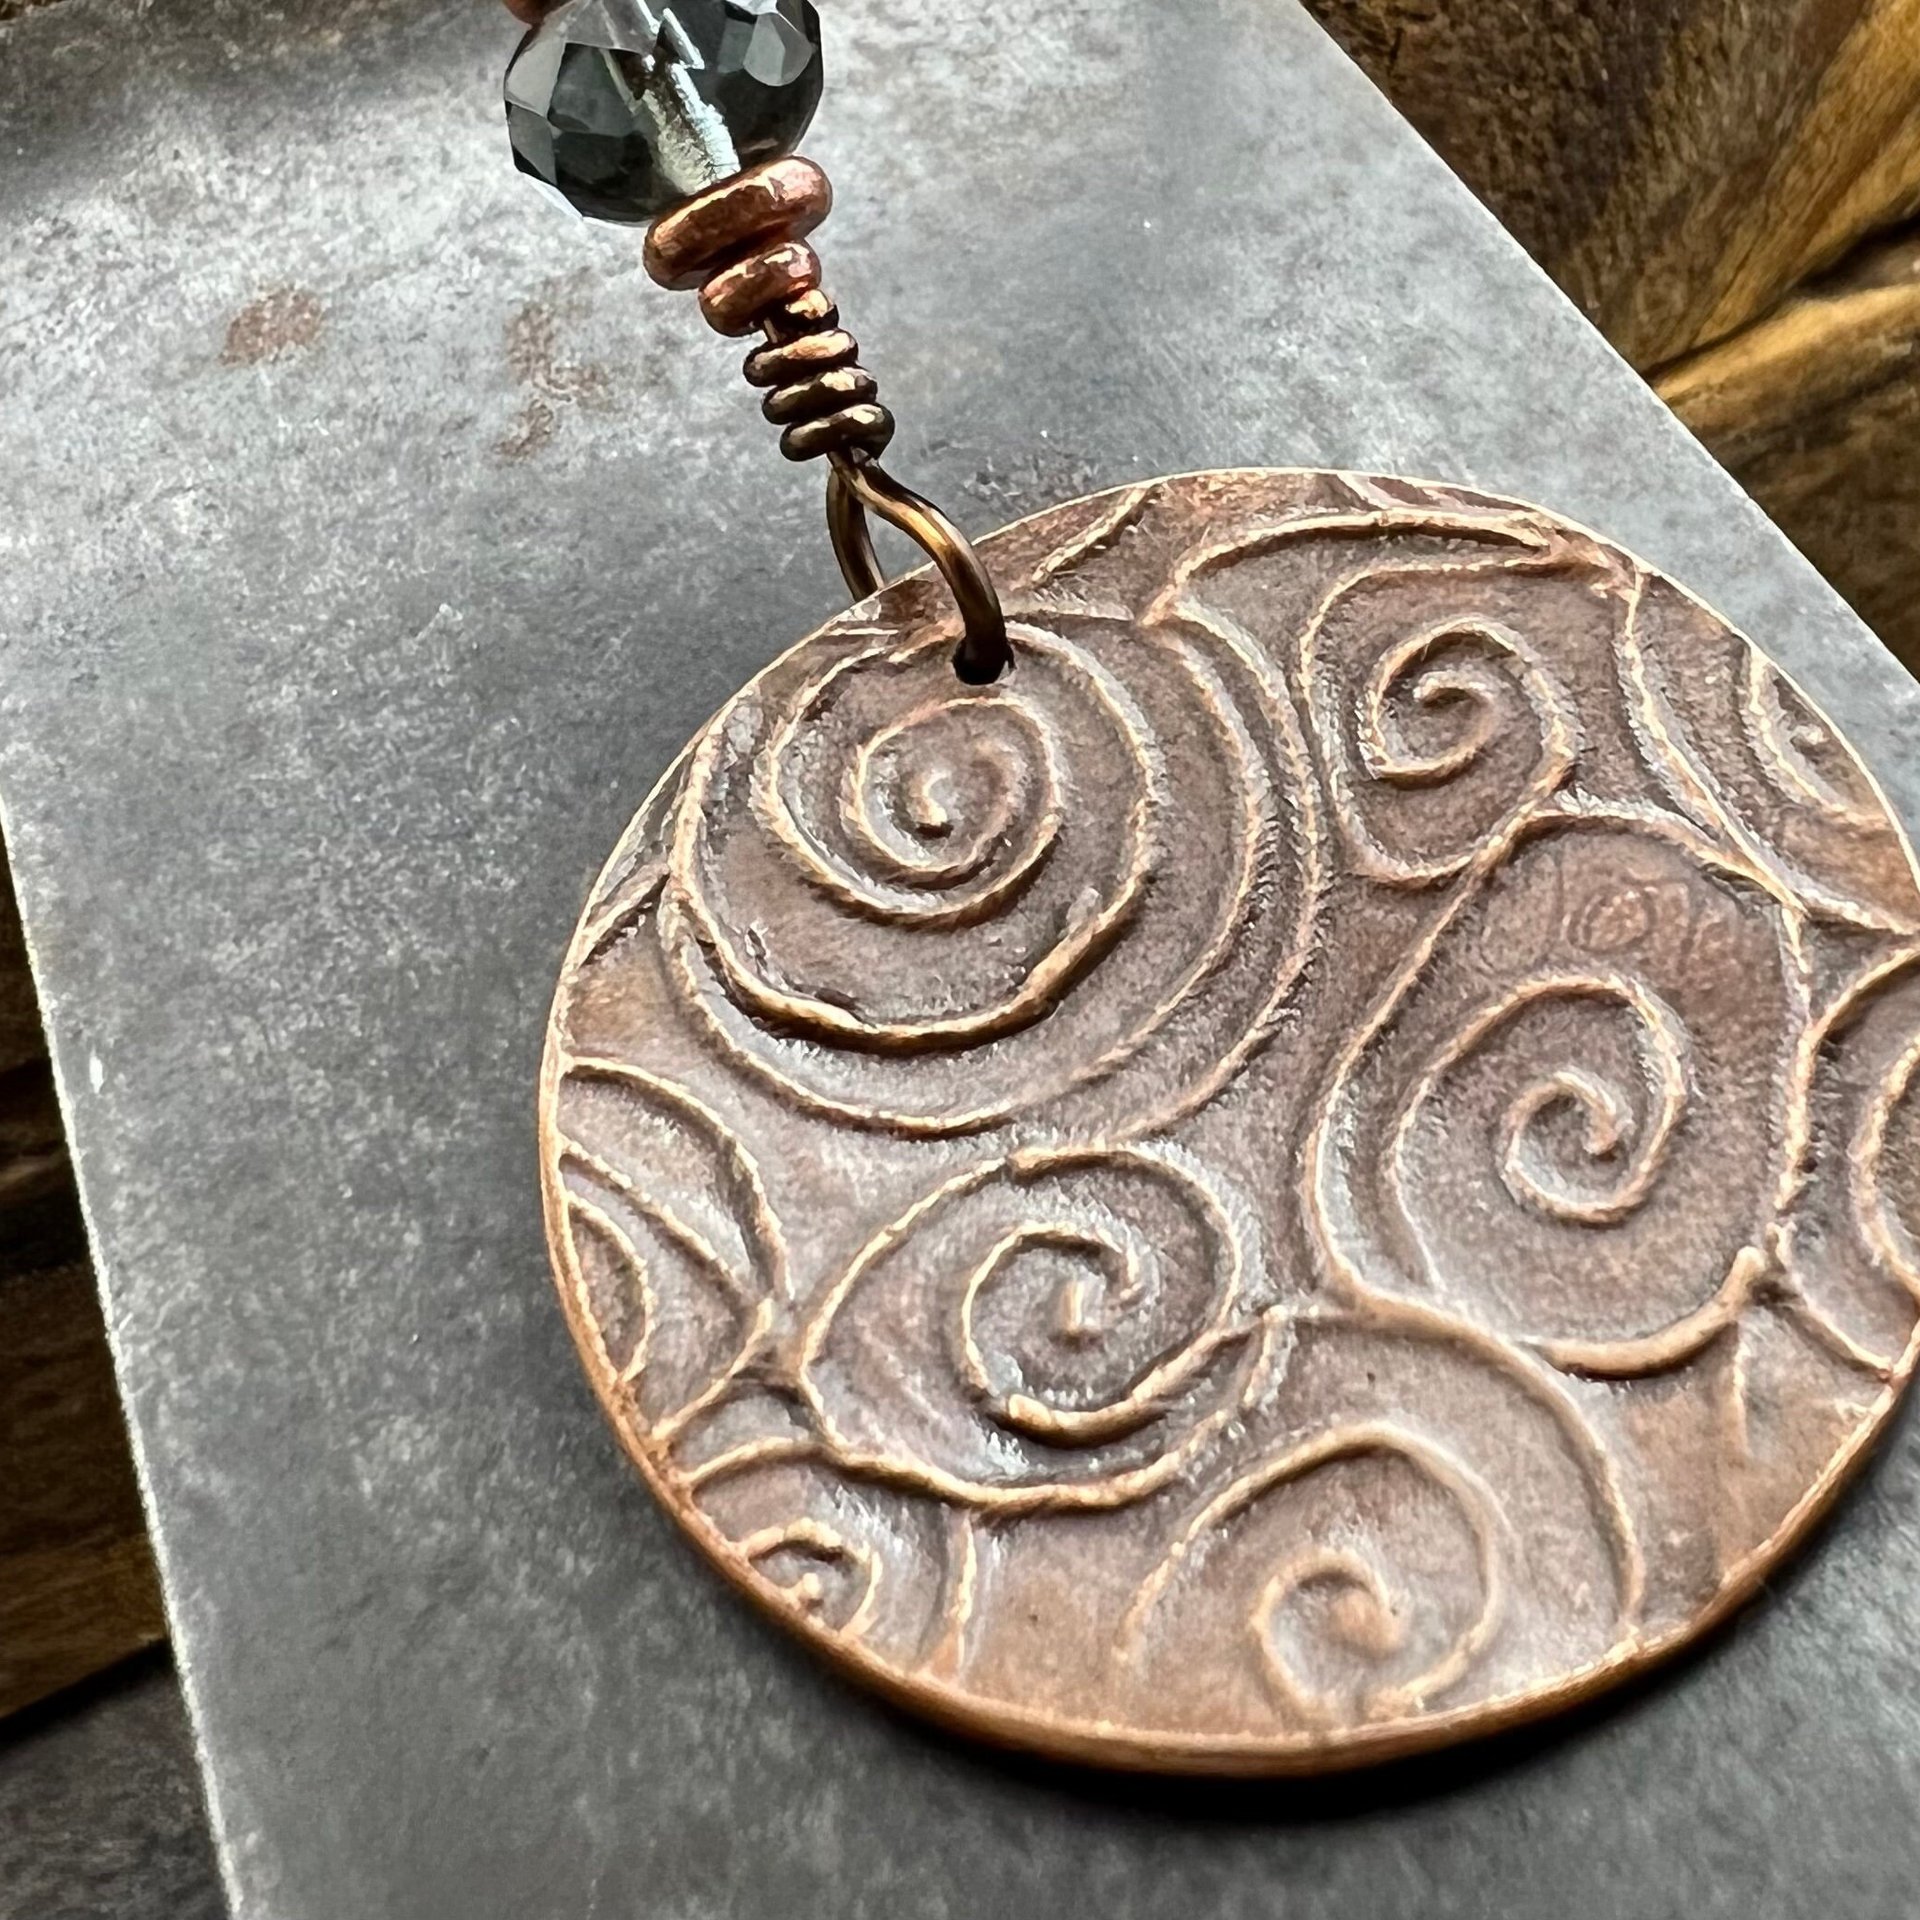 Tree of Life Pendant, Colorful Patina, Czech Glass Bead, Hand Carved, Irish Celtic Spirals, Celtic Witch Goddess, Ancient Earthy Jewelry